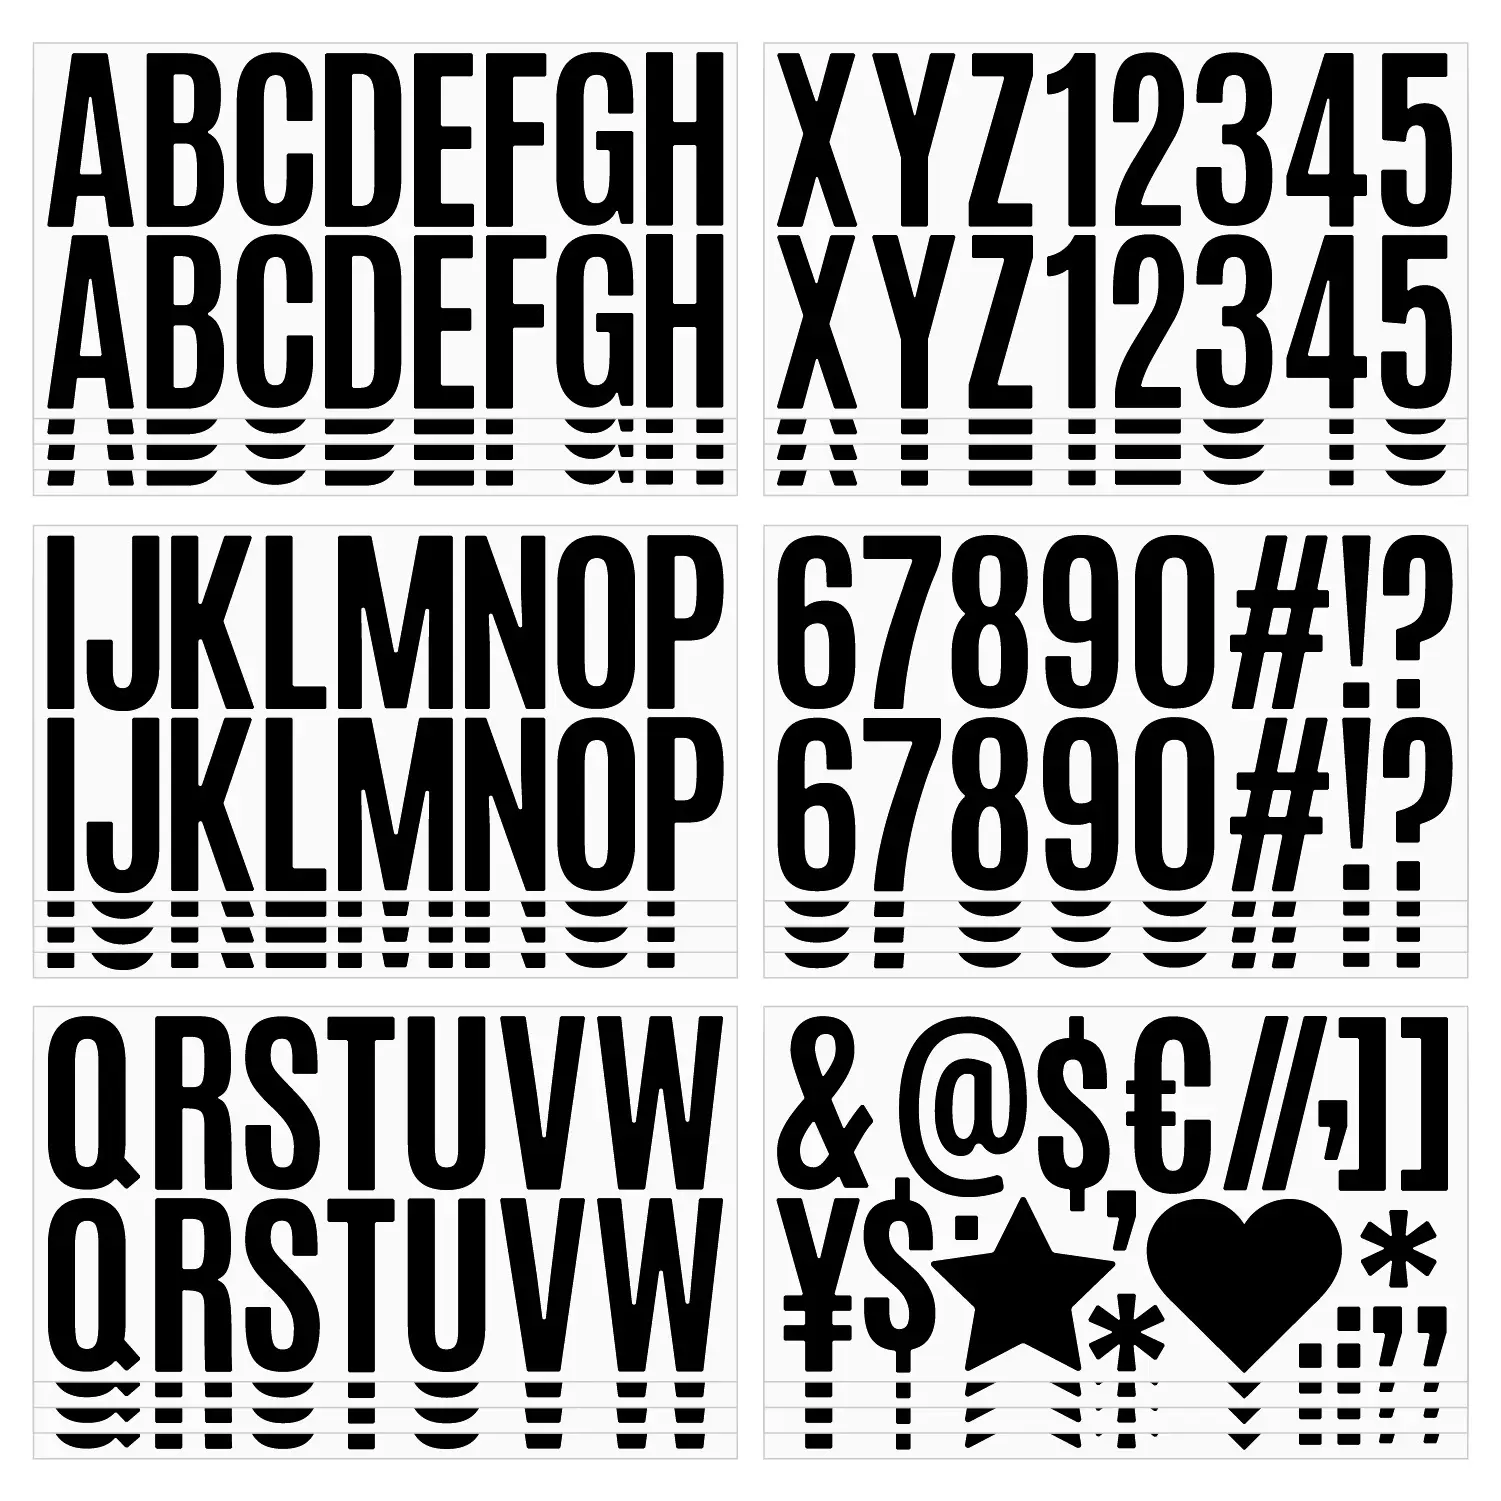 6 Sheets Vinyl large Letter Stickers 2.5 Inch Number Alphabet Stickers for Bulletin Board Letters Kit Mailbox Numbers Labels